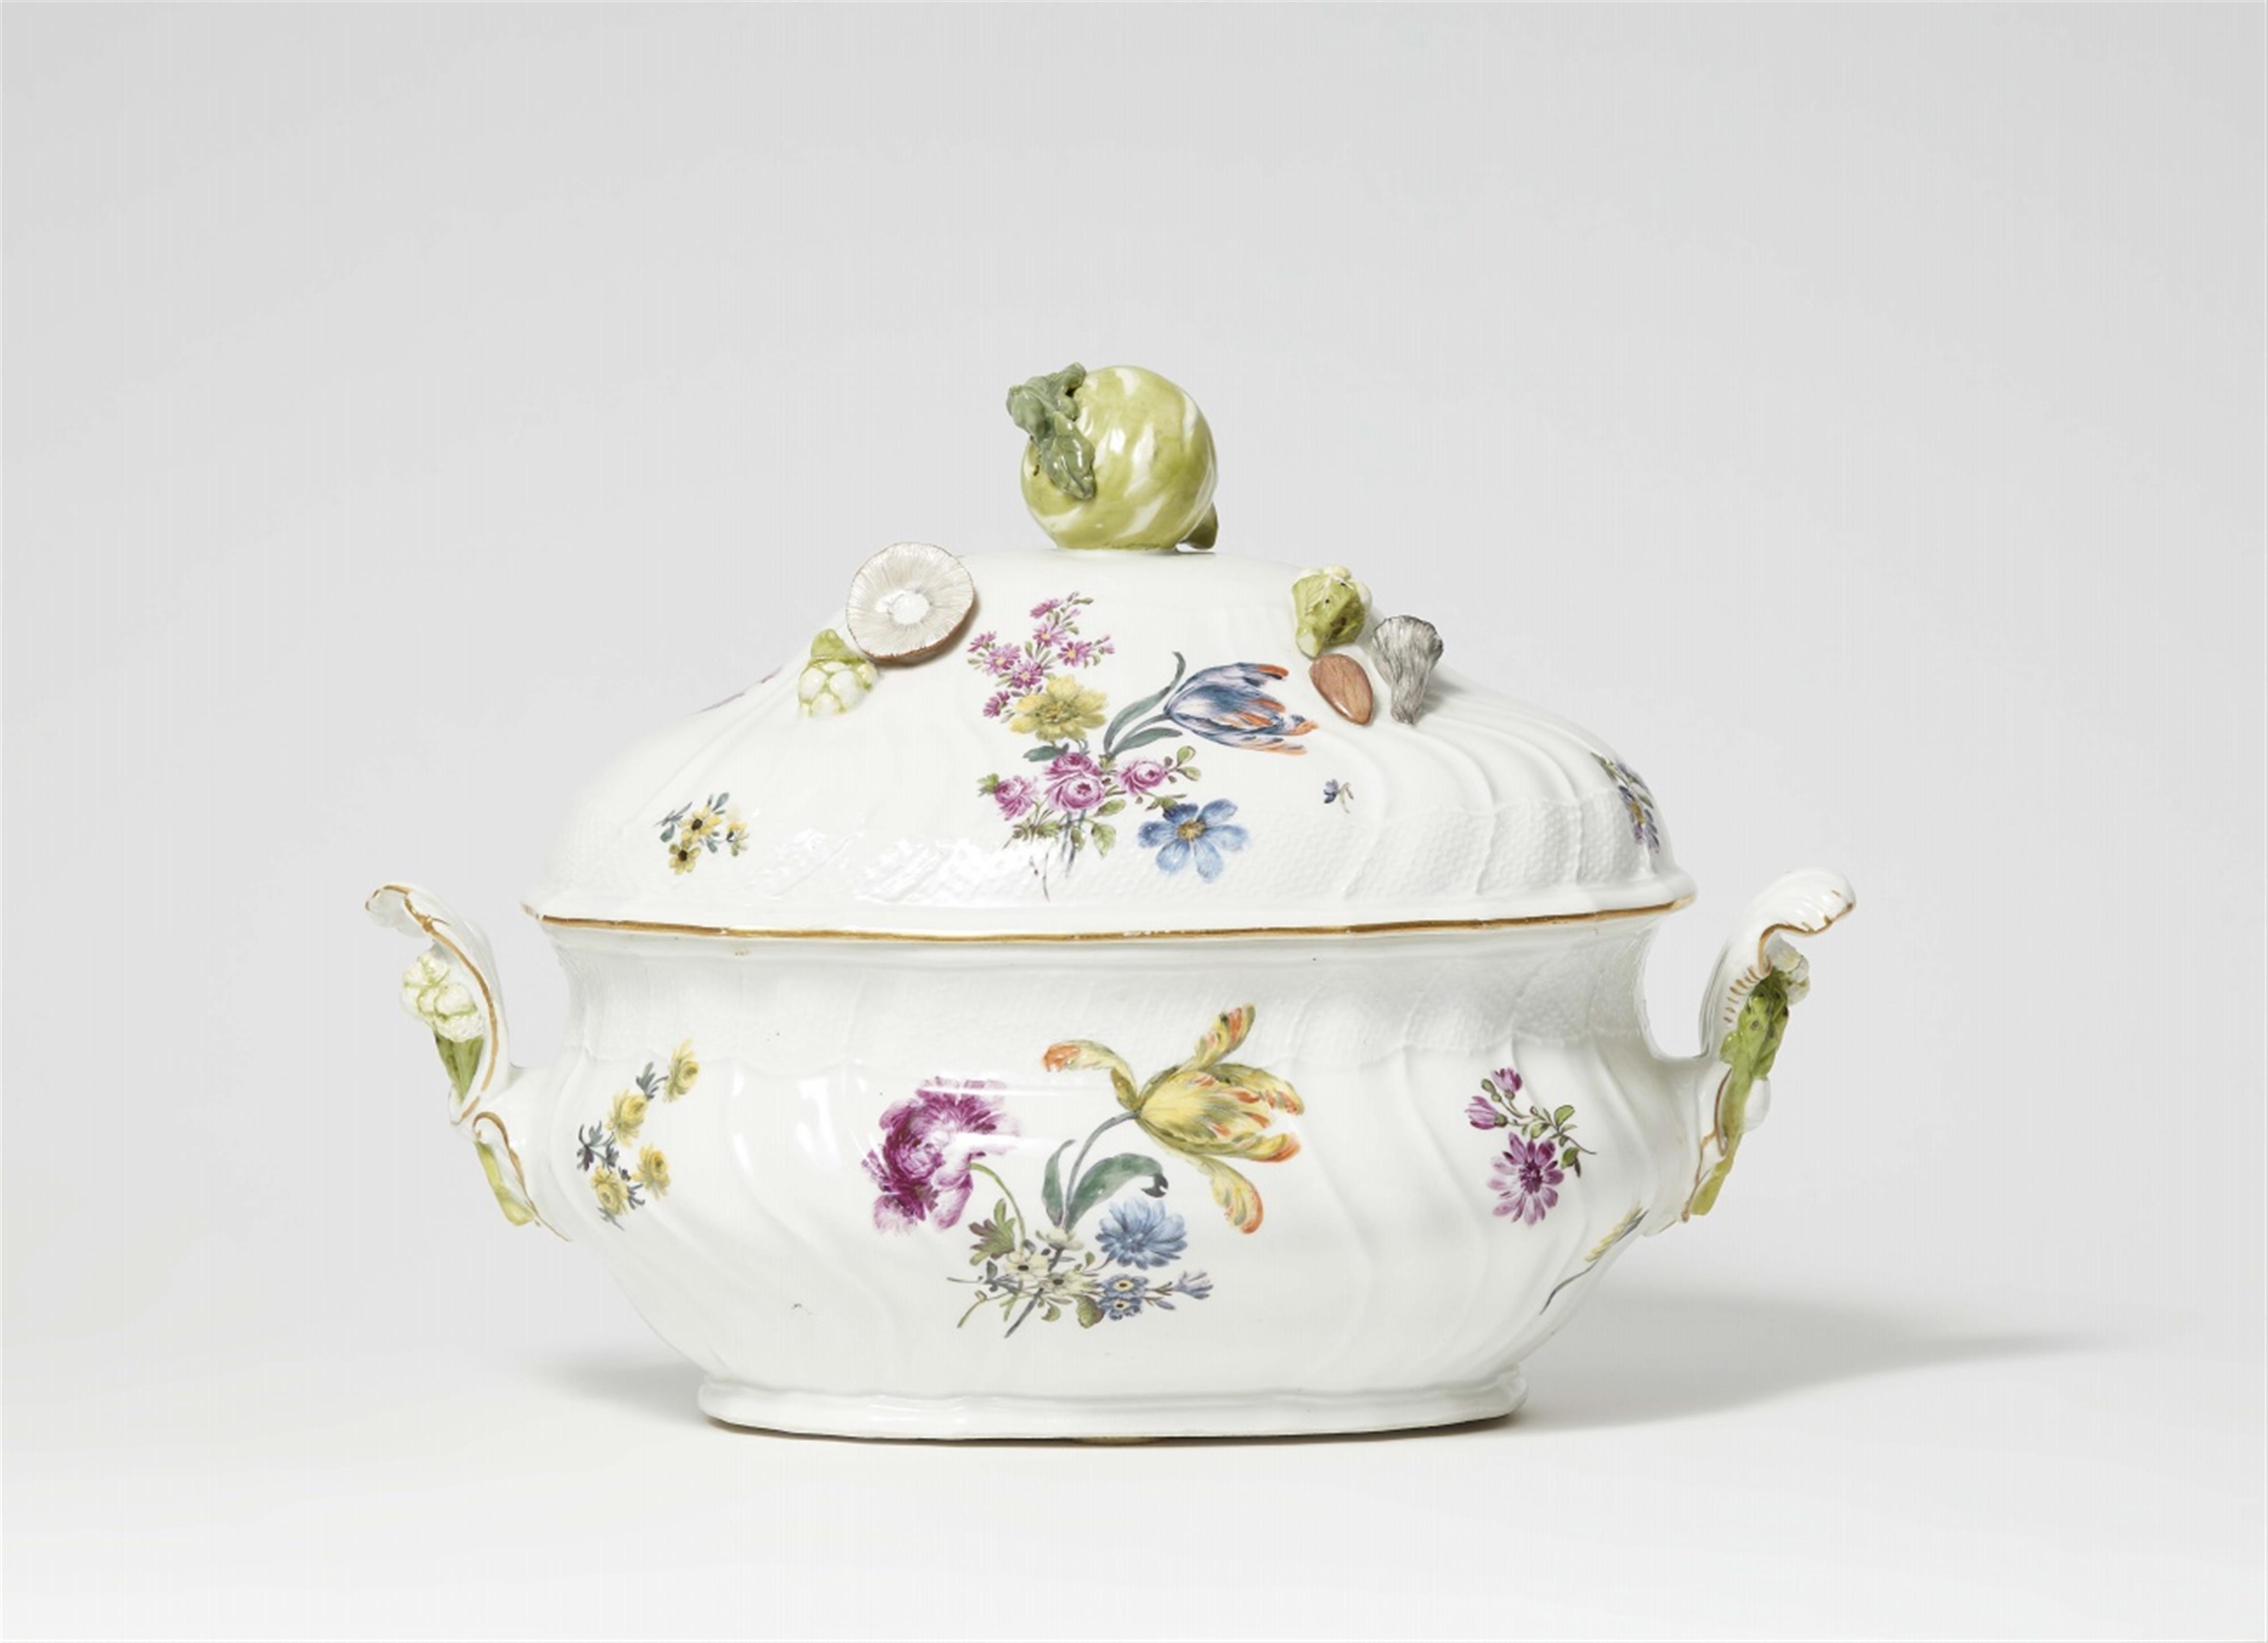 A Meissen porcelain vegetable tureen with naturalistic flowers - image-1